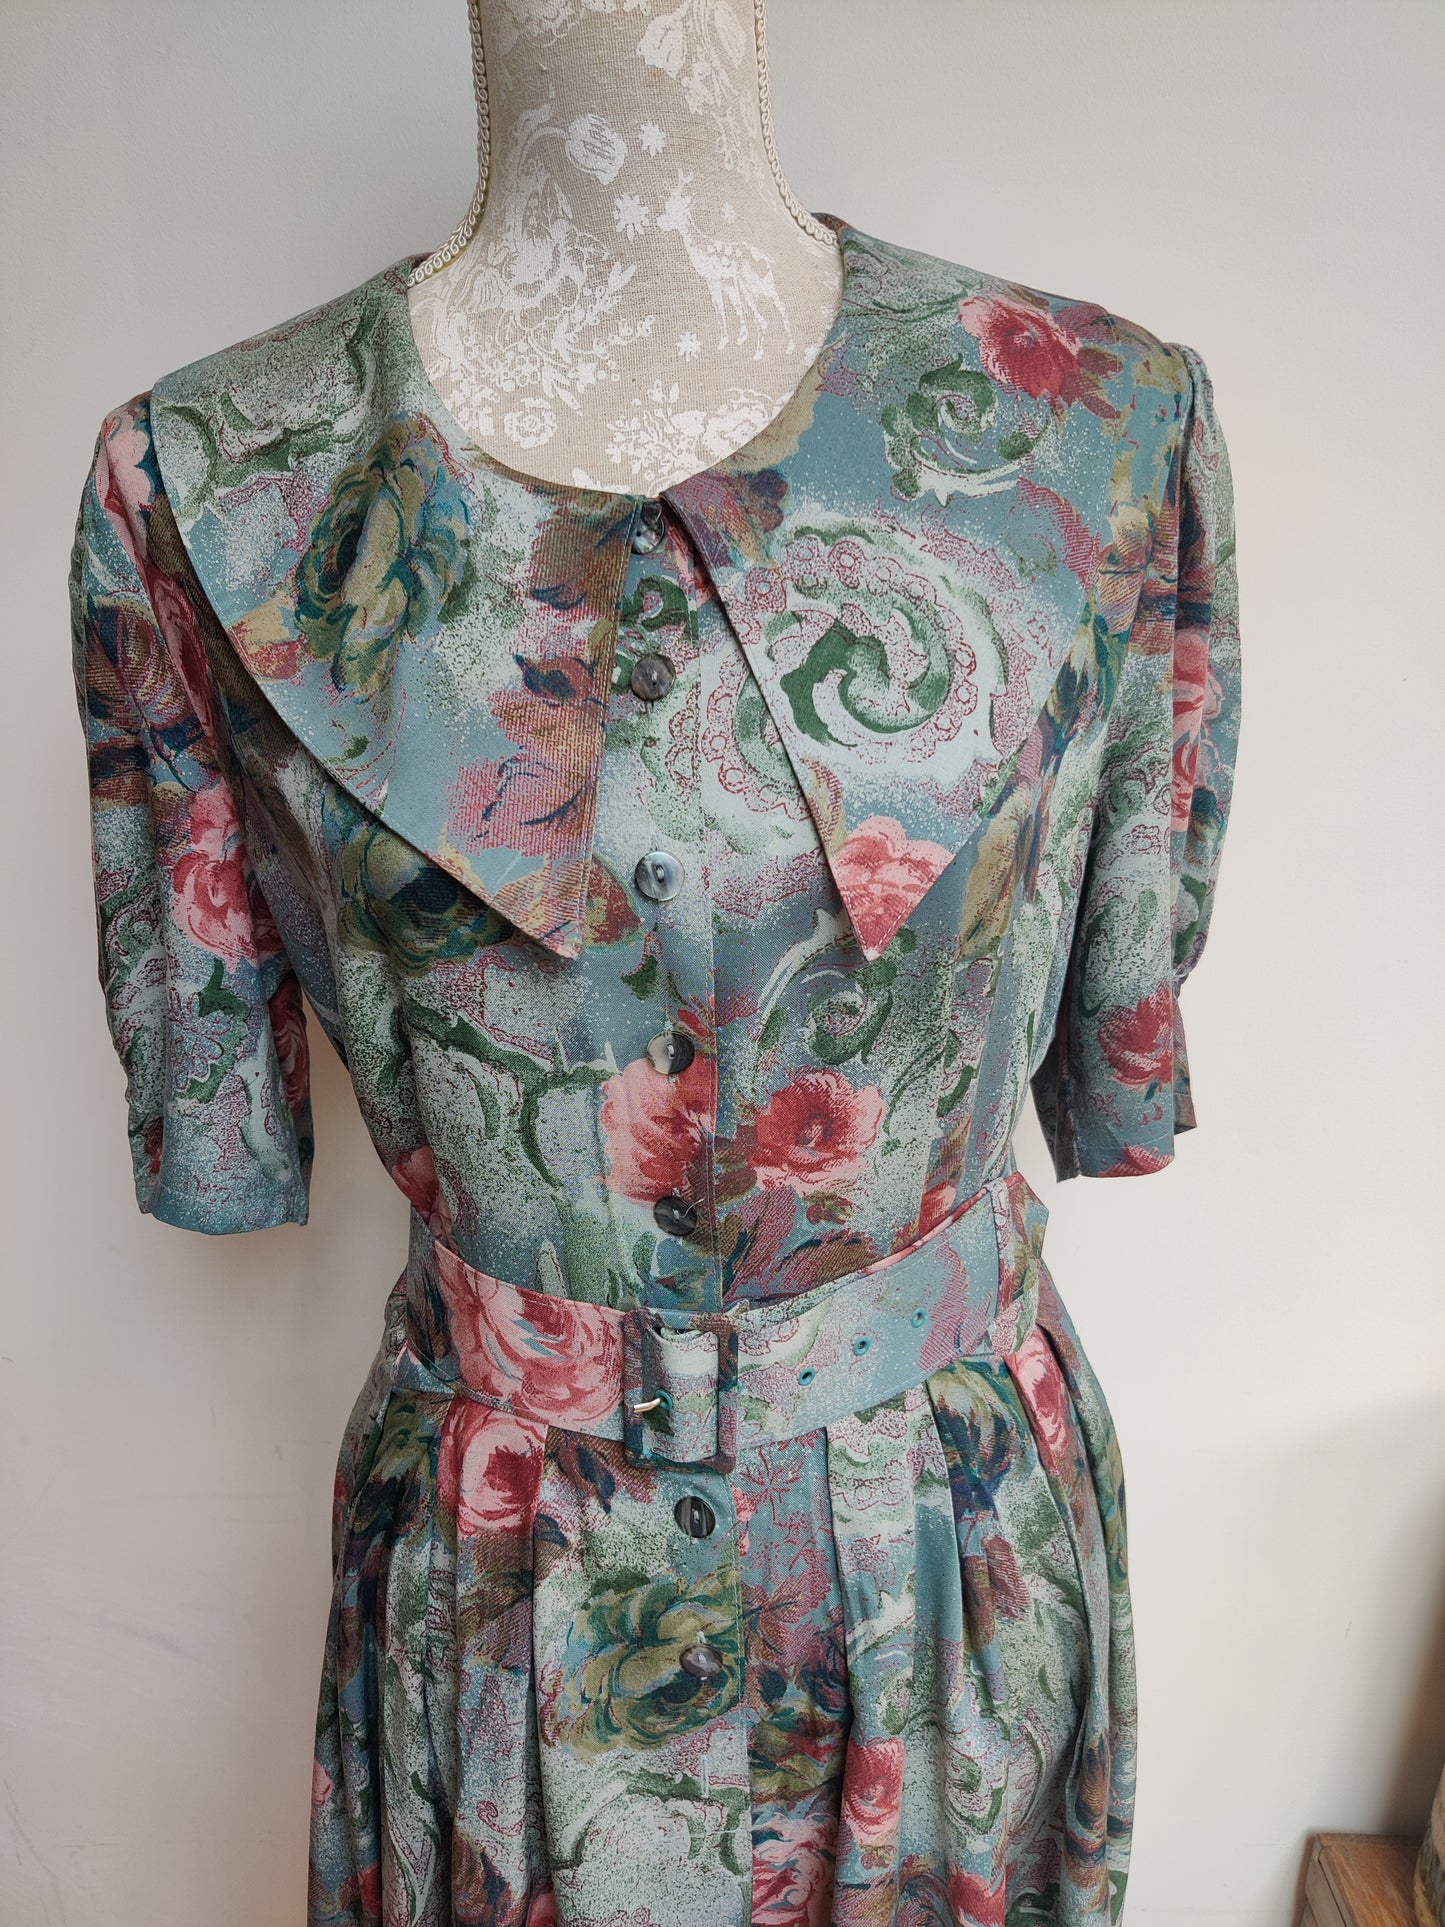 Floral dress with huge statement collar size 12